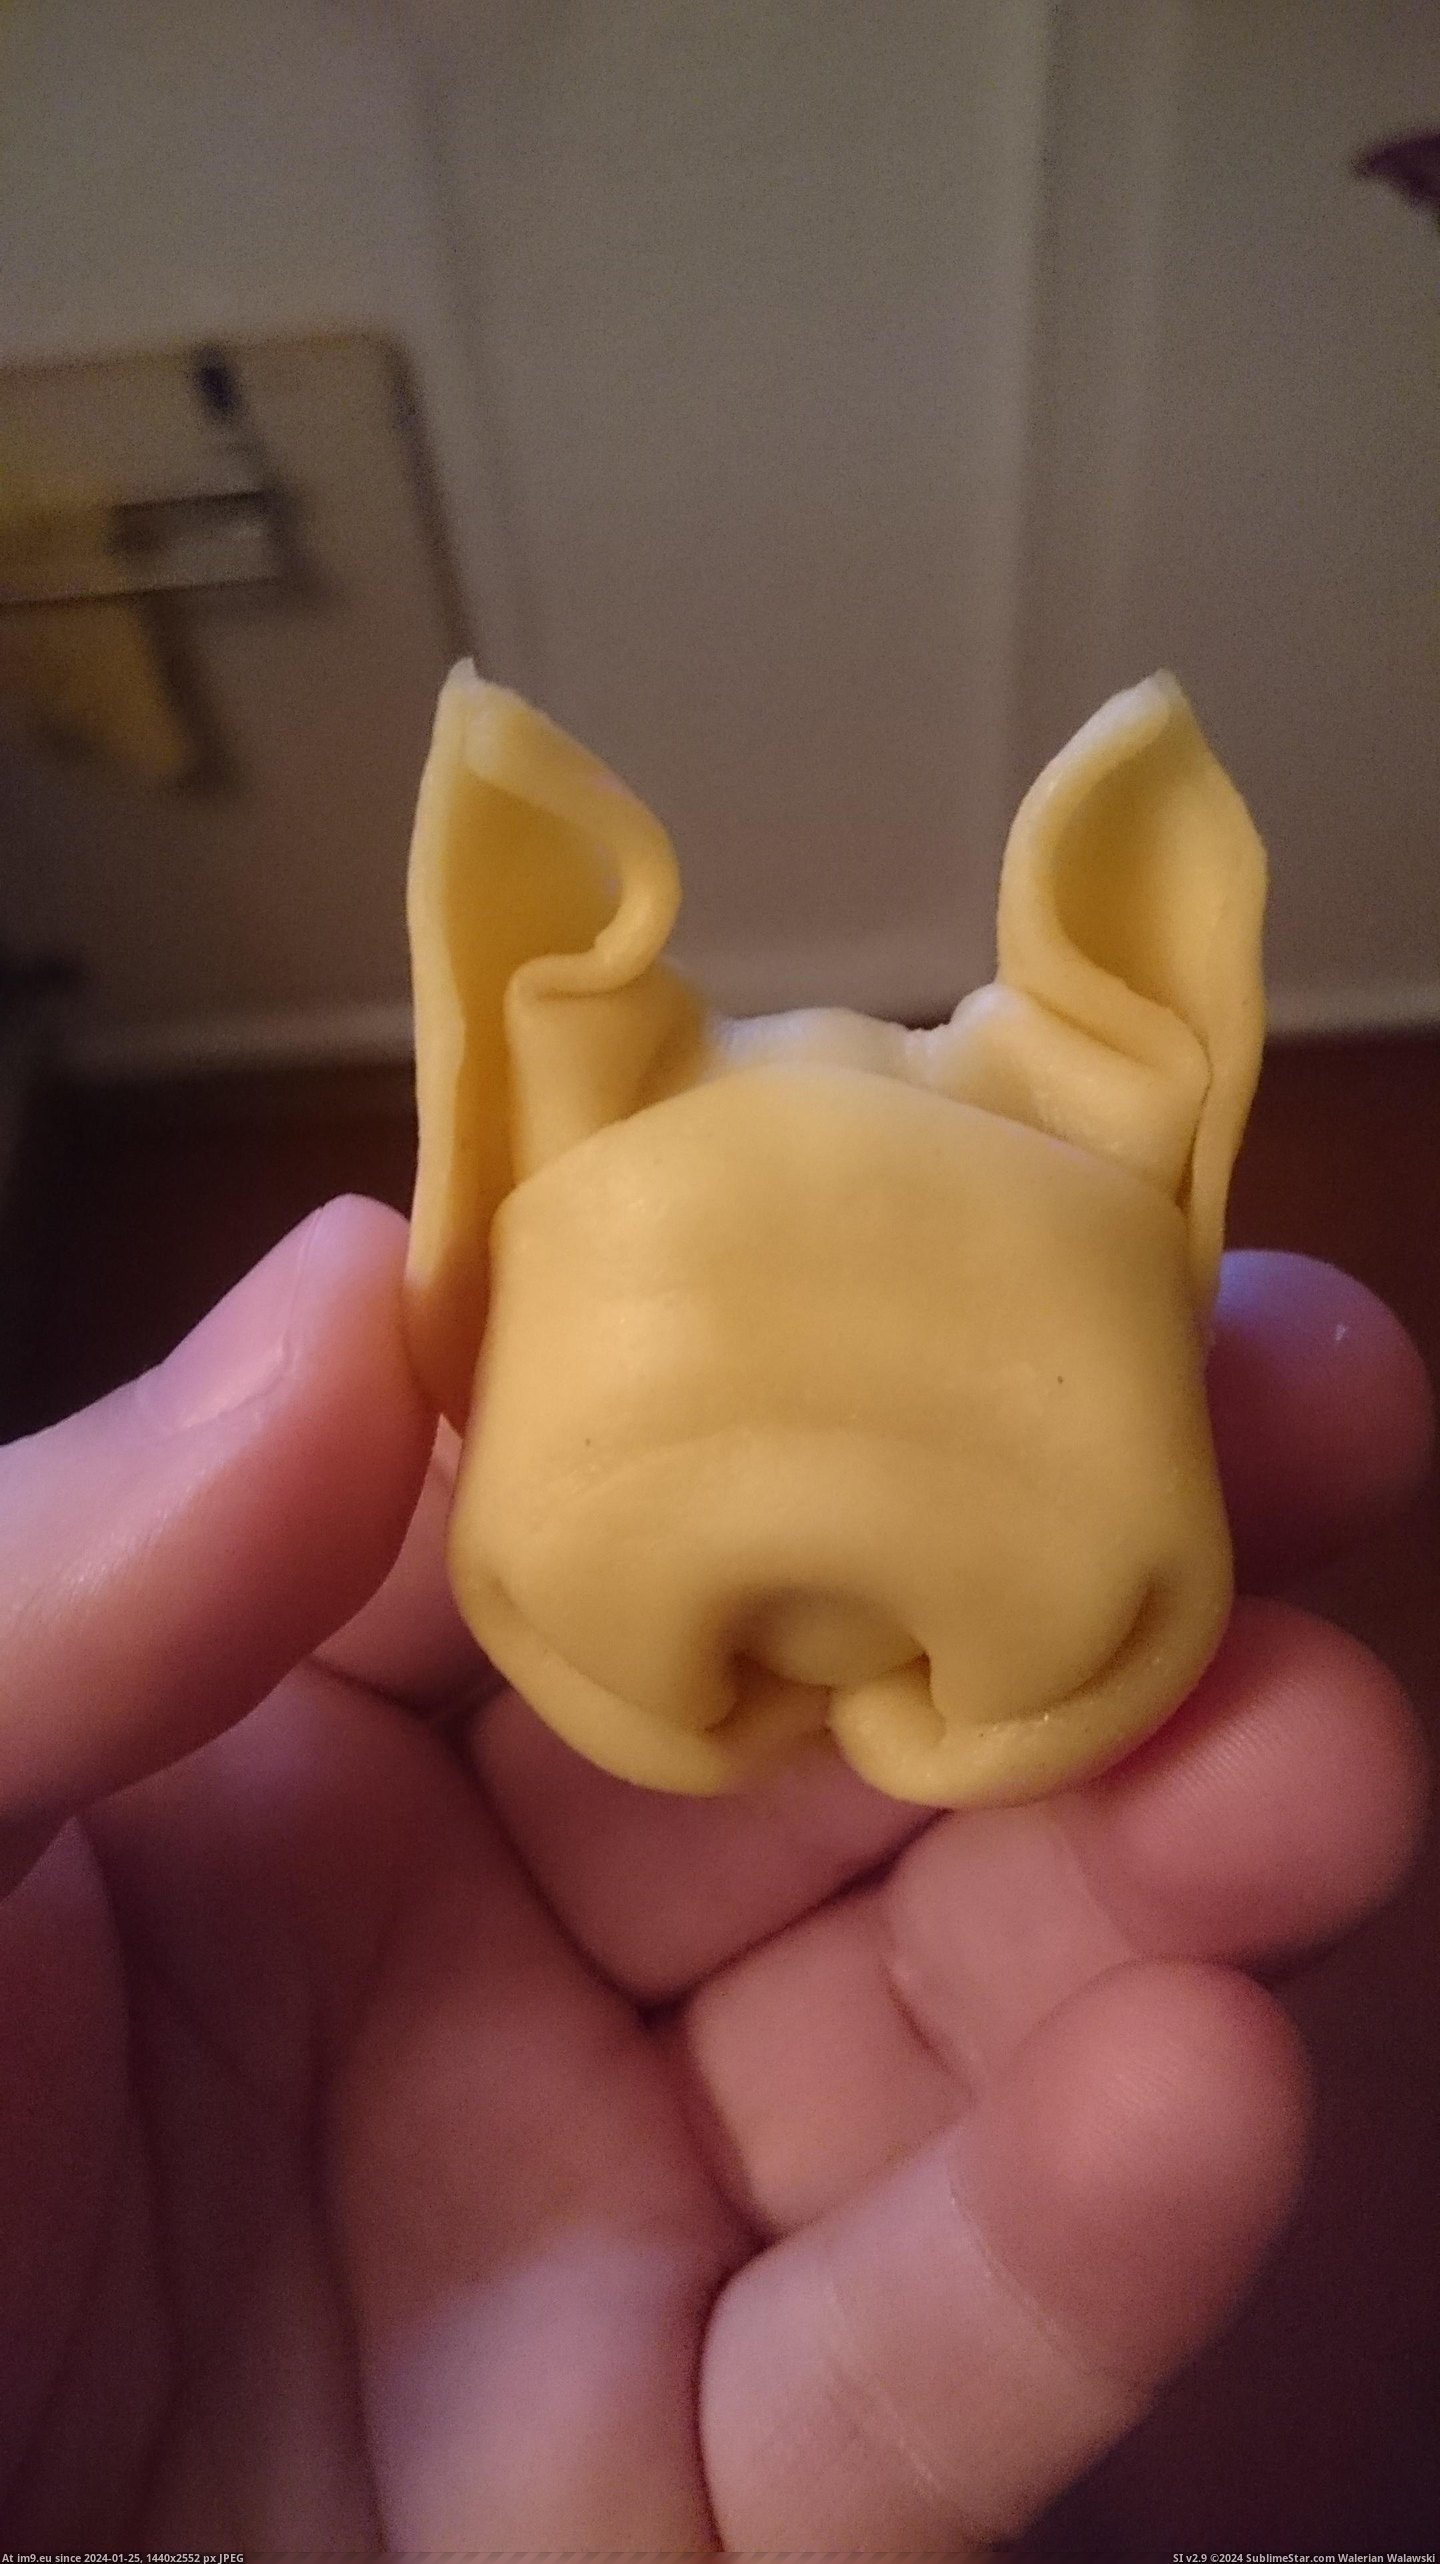 #Two #French #Pieces #Bulldog #Pasta #Head #Looked [Mildlyinteresting] These two pieces of pasta looked like the head of a french bulldog. Pic. (Bild von album My r/MILDLYINTERESTING favs))